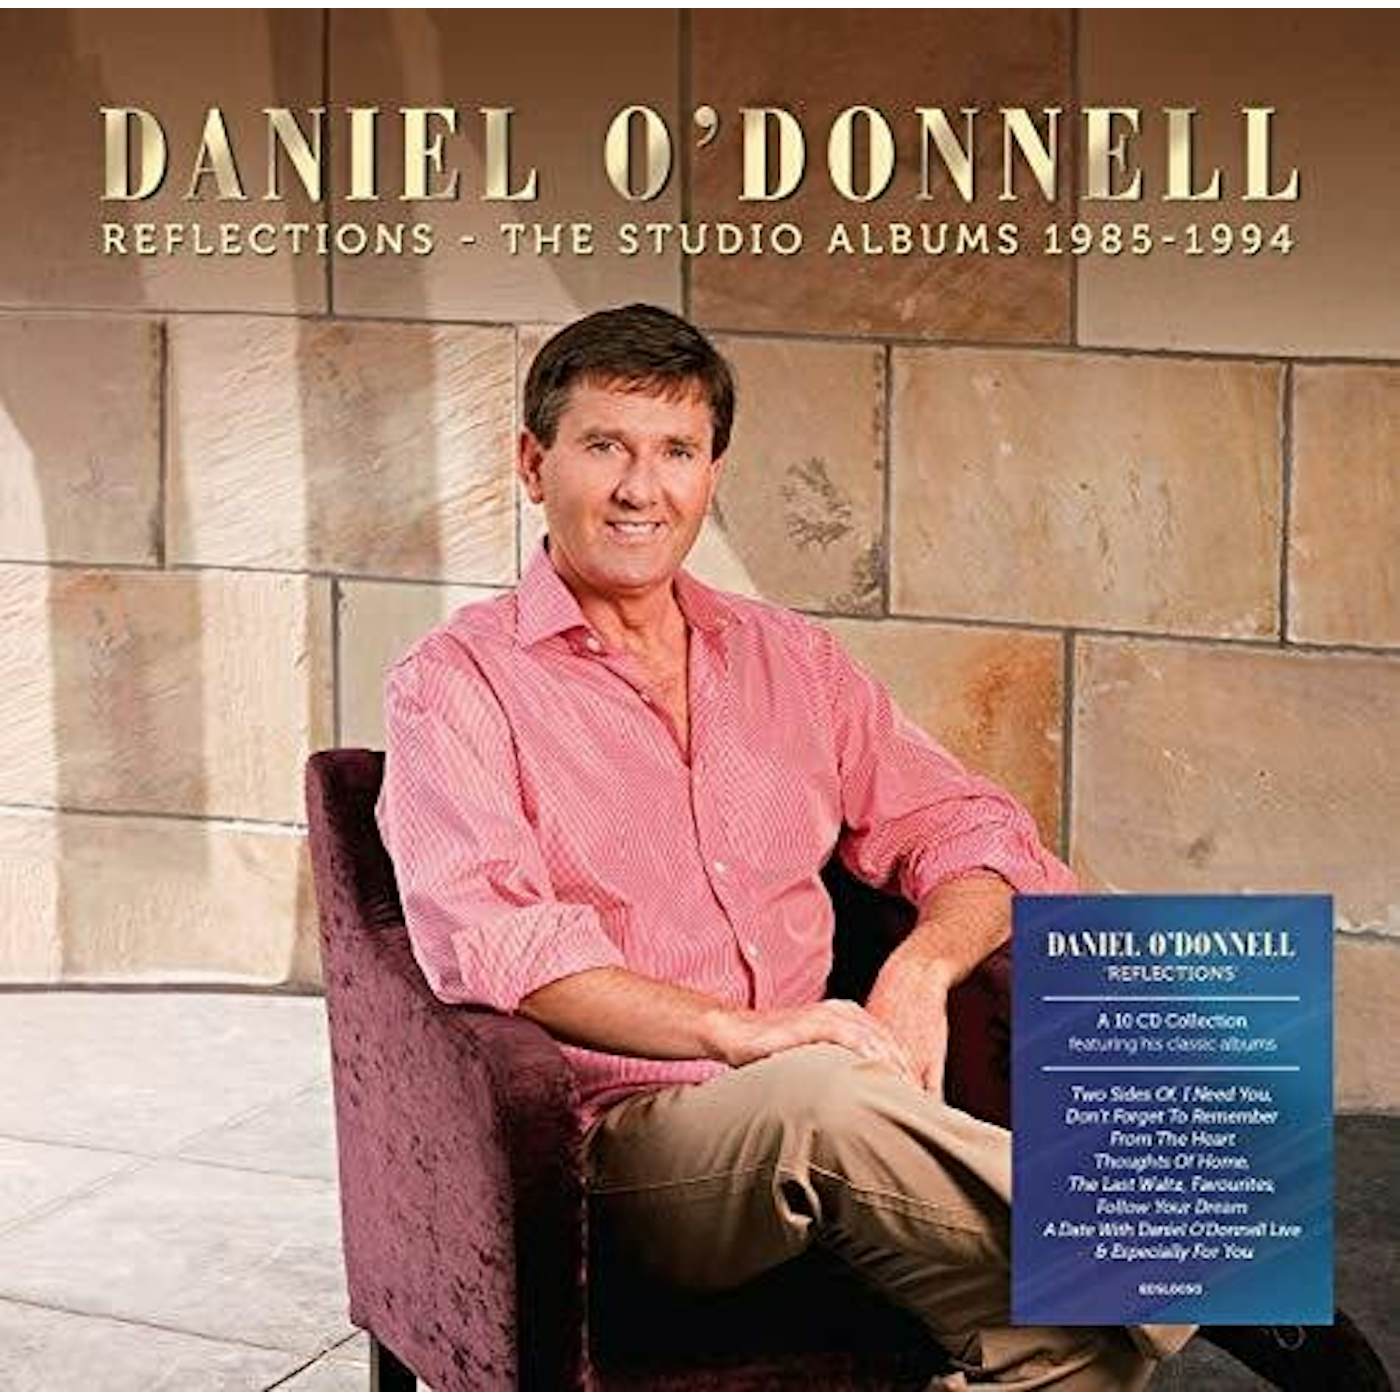 Daniel O'Donnell REFLECTIONS: THE STUDIO ALBUMS 1985-1994 CD